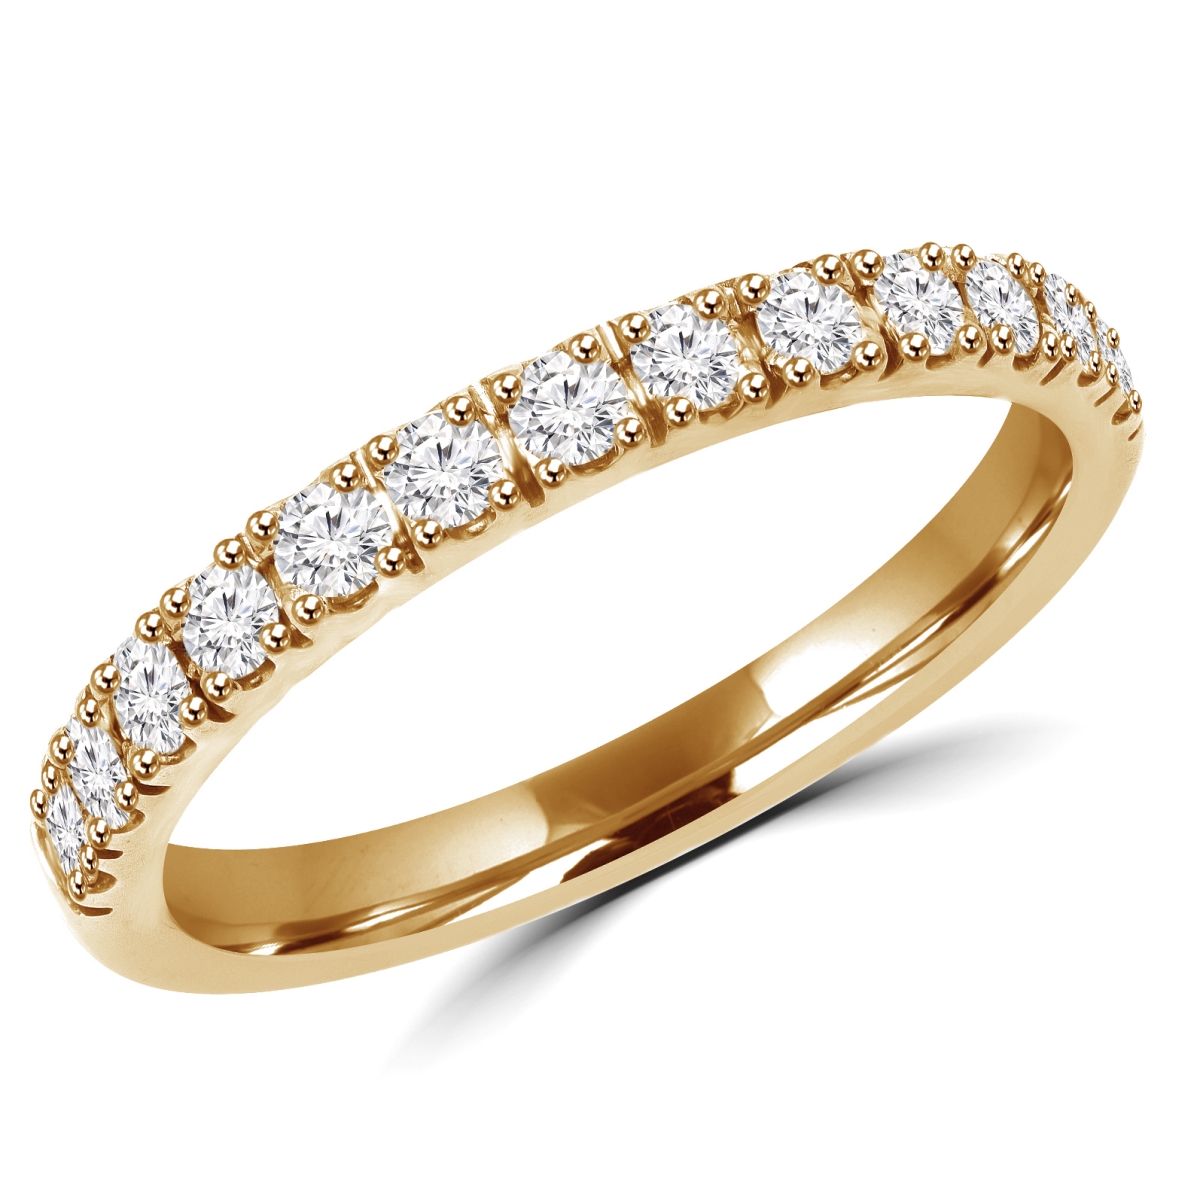 Picture of Majesty Diamonds MD180187-6.25 0.3 CTW Round Diamond Semi-Eternity Wedding Band Ring in 14K Yellow Gold - Size 6.25